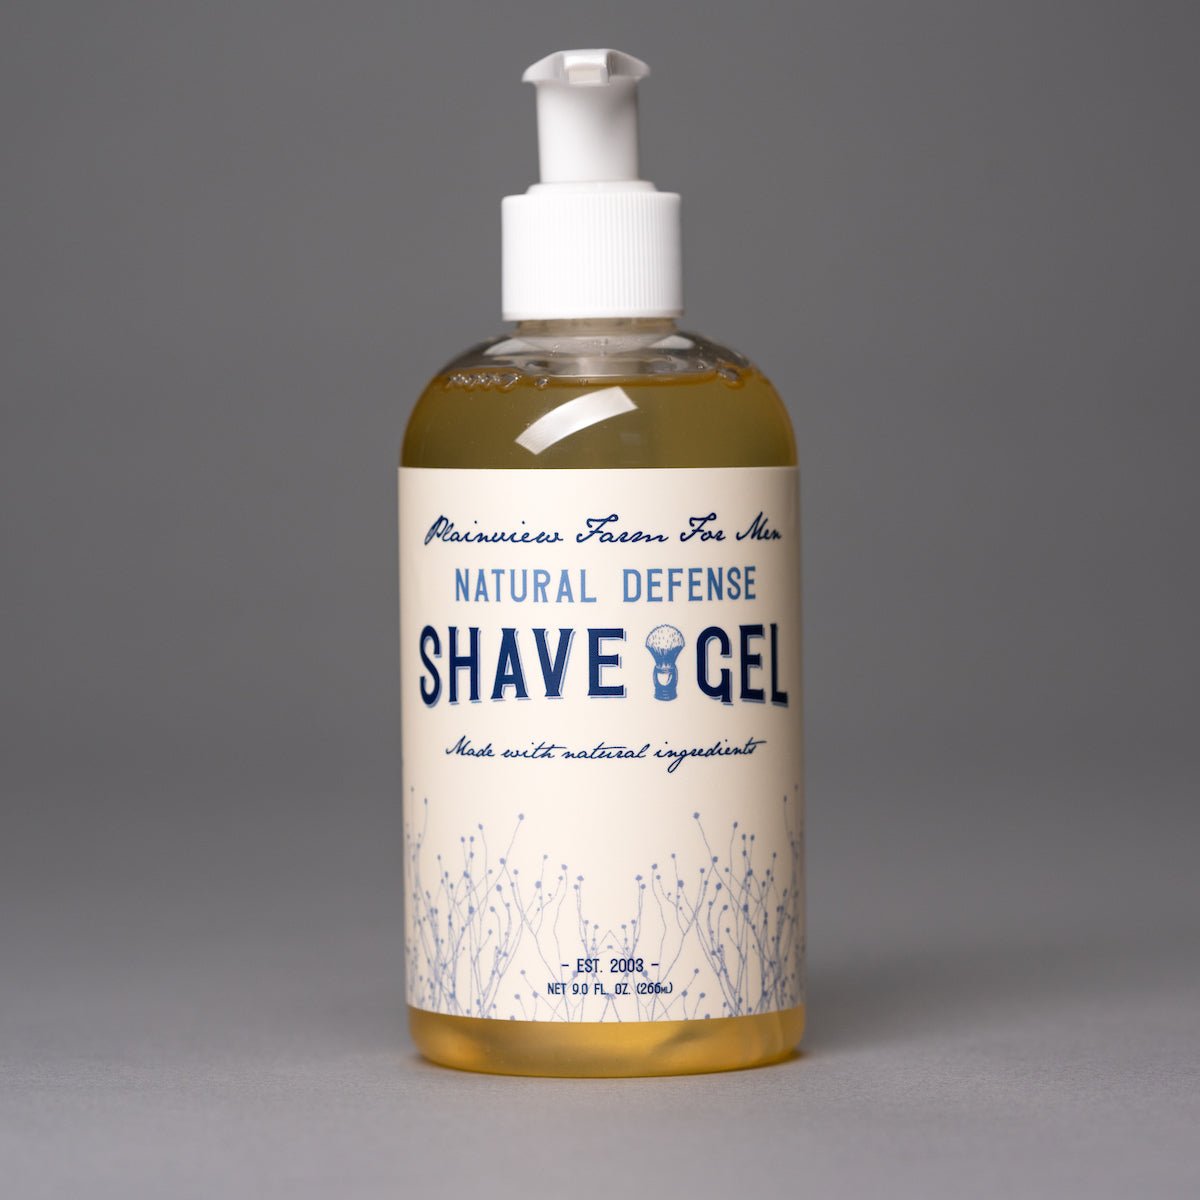 Natural Defense - Shave Gel - Kentucky Soaps & Such